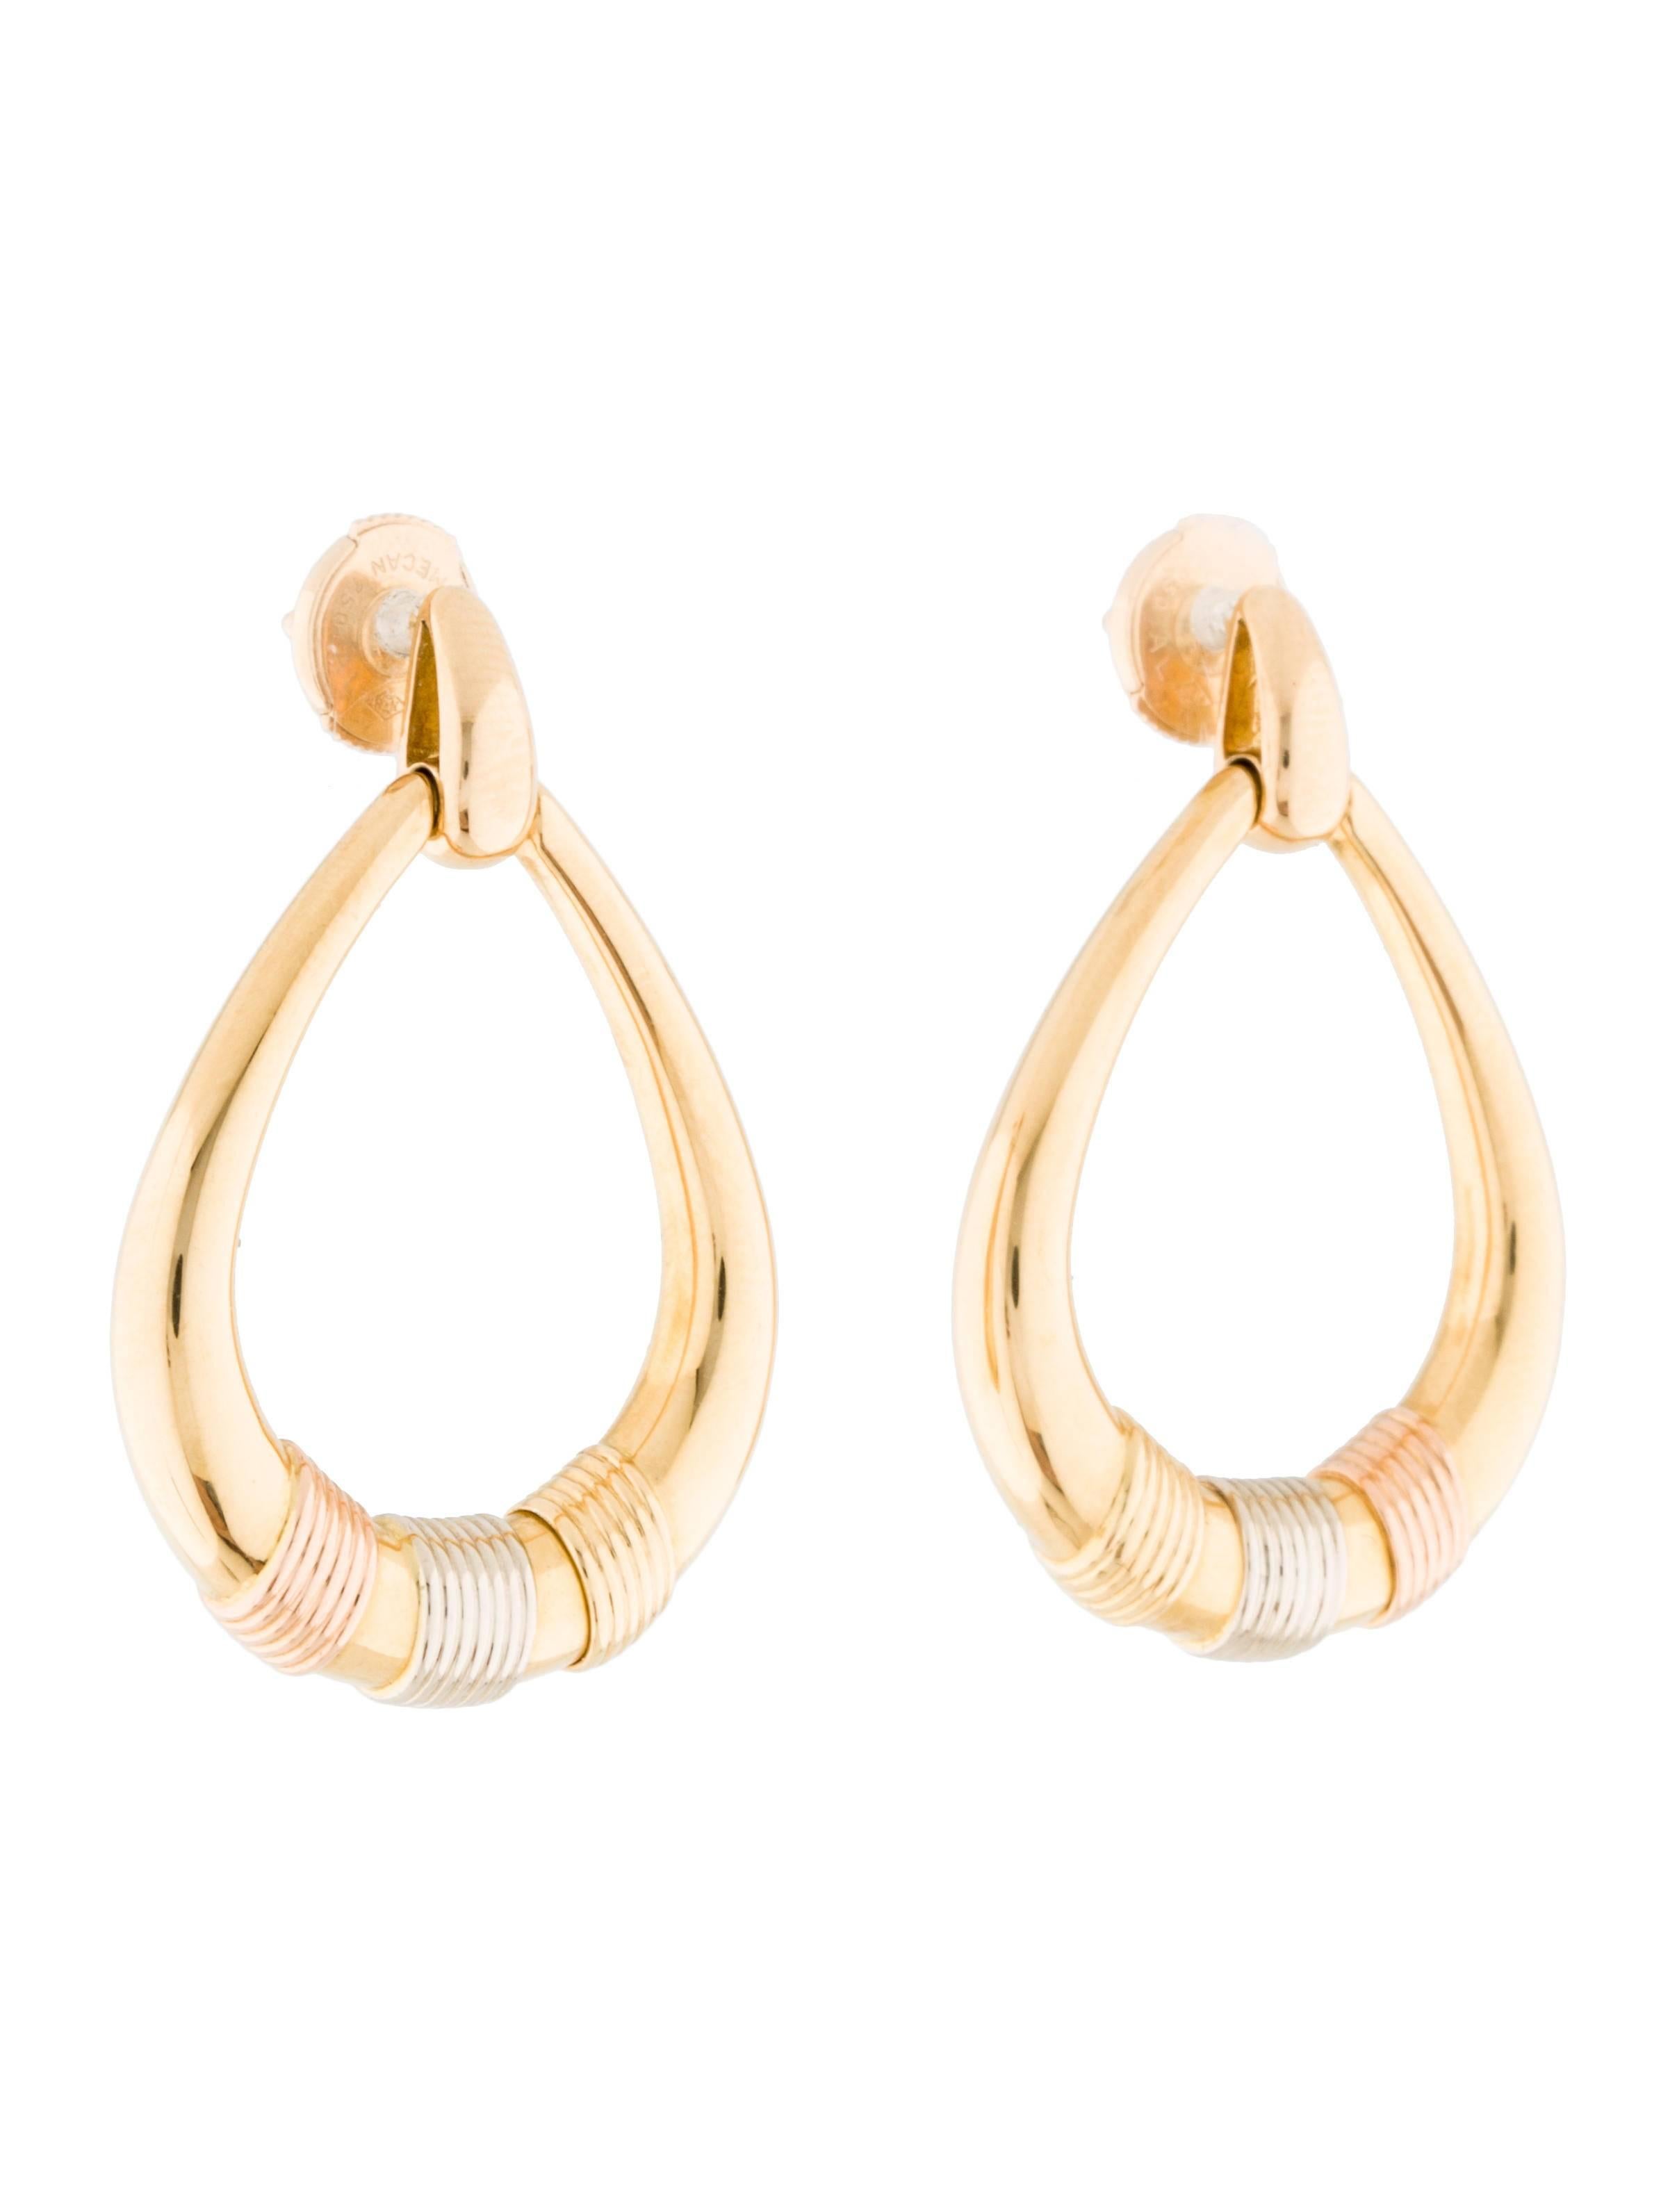 18K yellow gold Cartier Trinity drop earrings with 18K yellow, white and rose gold ridged motif accents and clutch back closures.

Metal Type: 18K Yellow Gold, 18K White Gold, 18K Rose Gold
Hallmark: 750, Brand Hallmark, Serial Number
Signature: